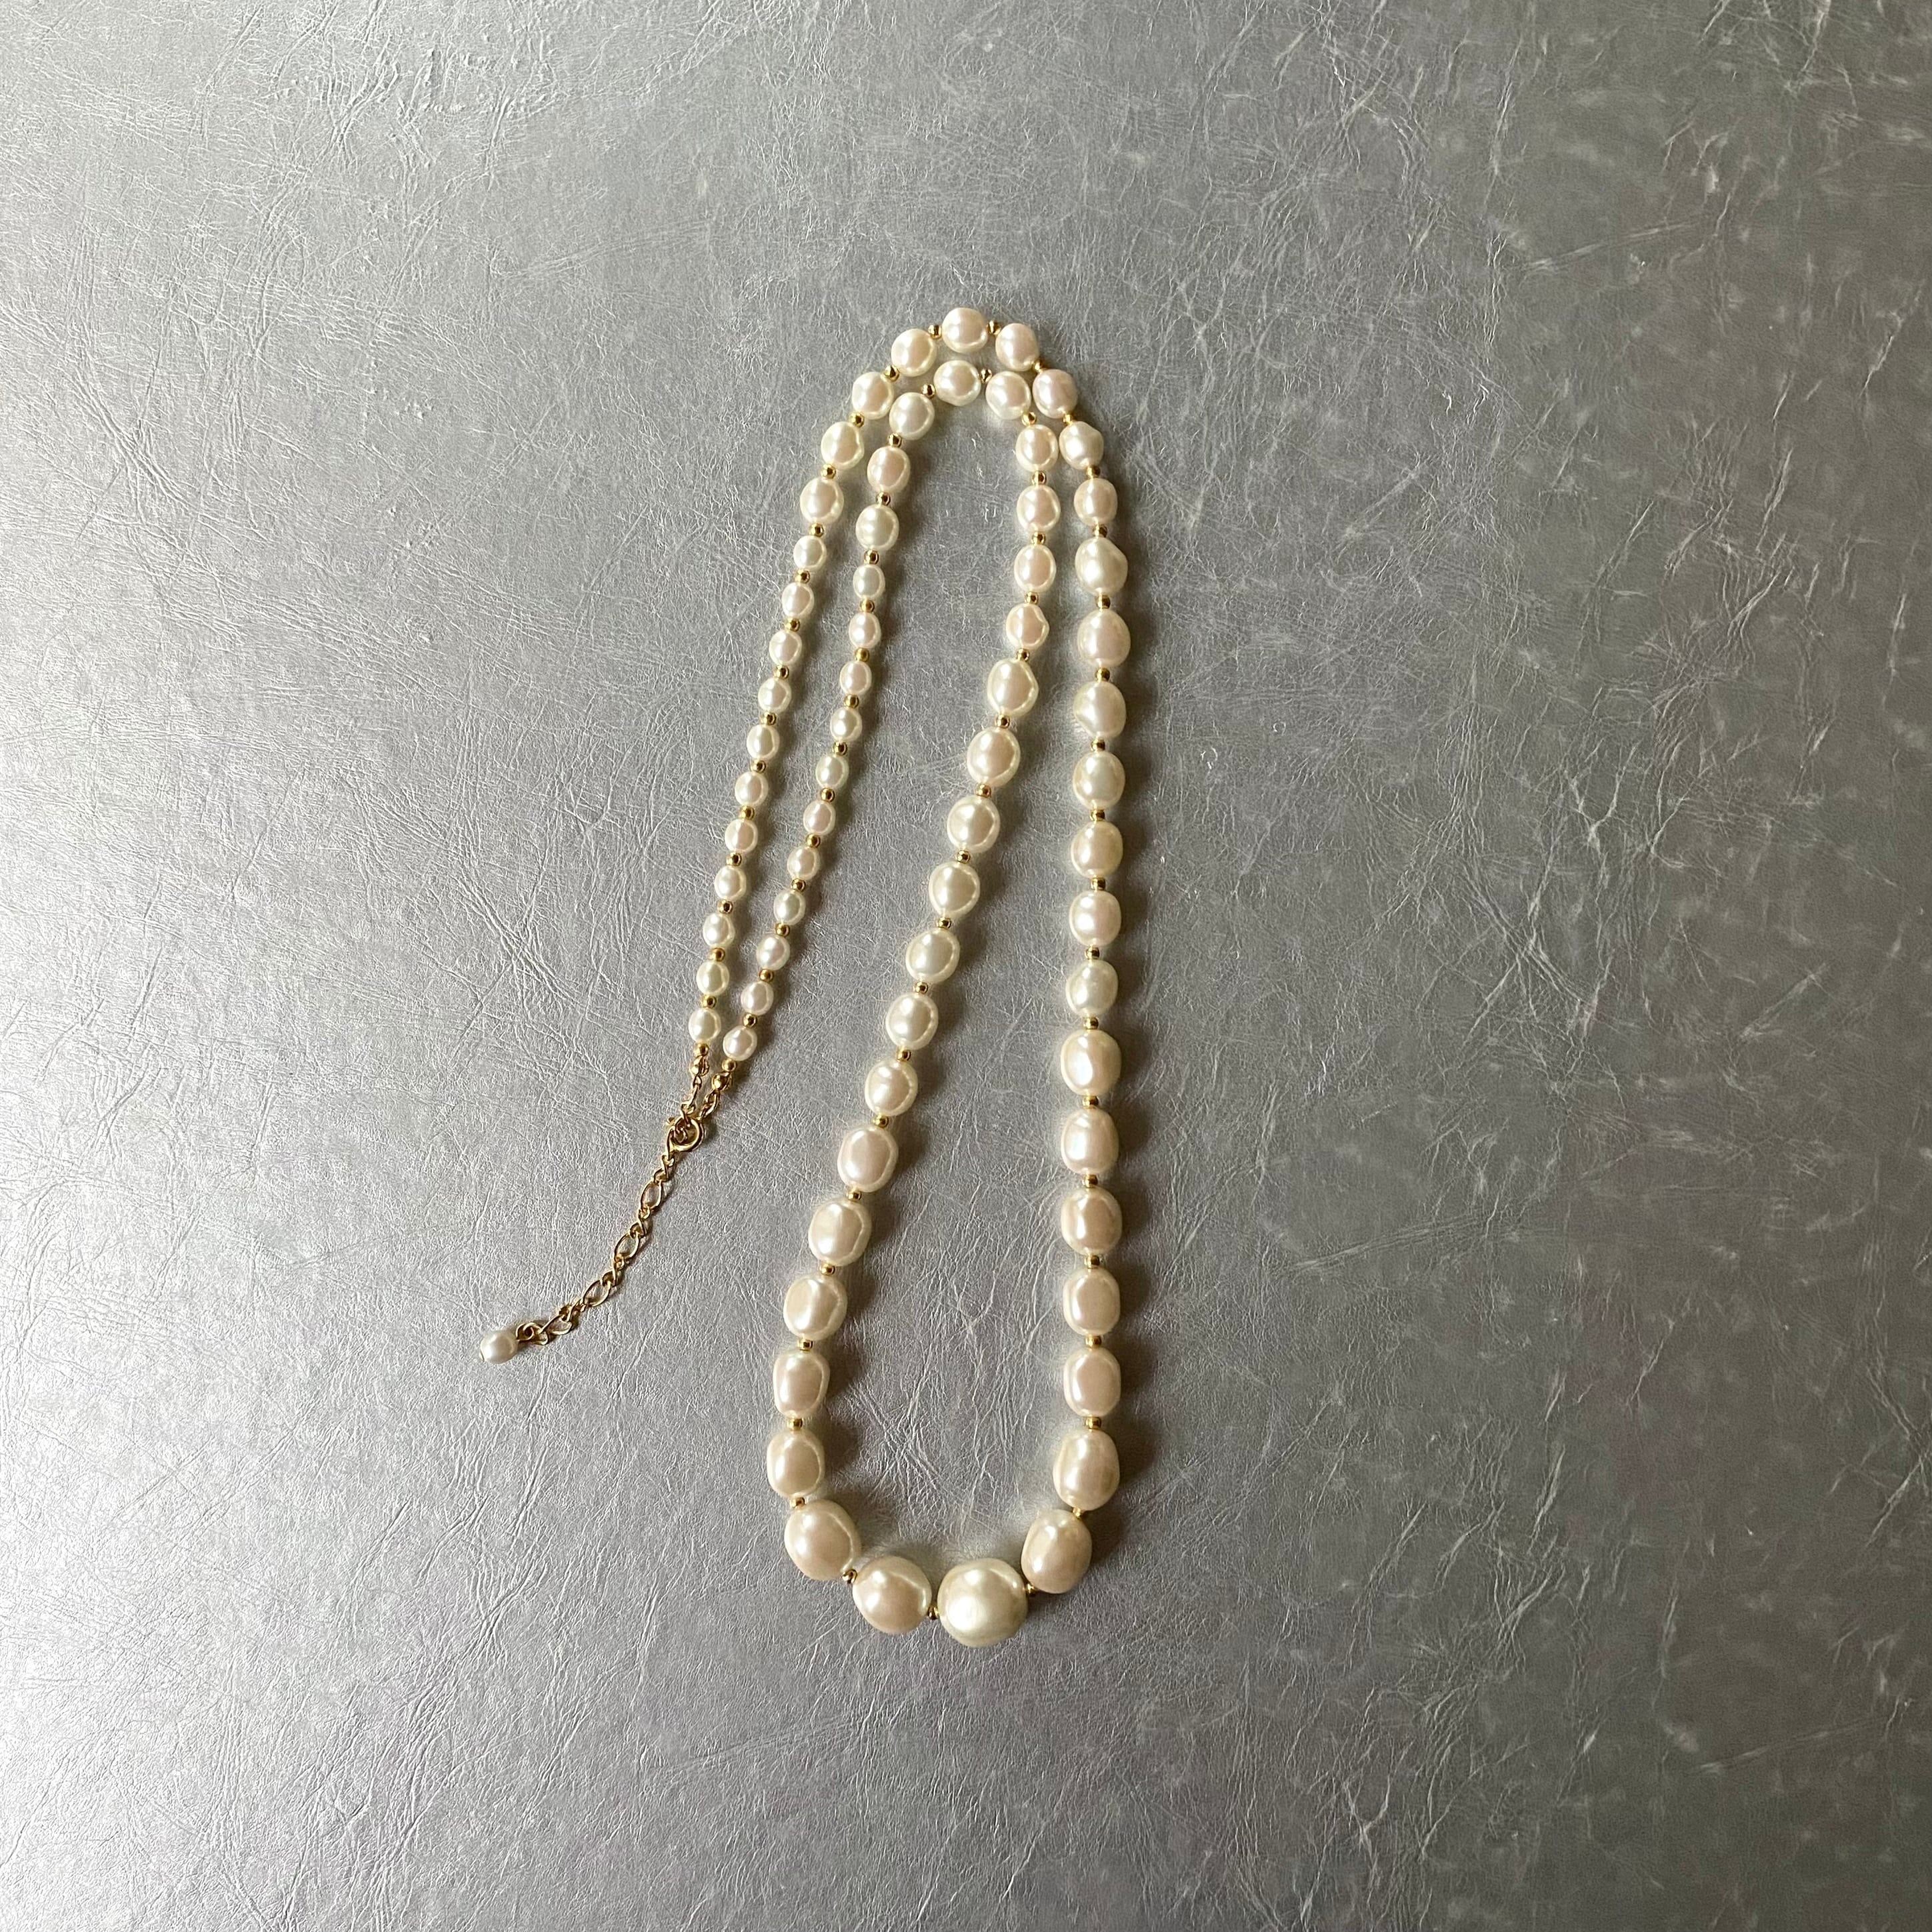 Used retro baroque pearl long necklace レトロ ユーズド バロックパール ロング ネックレス